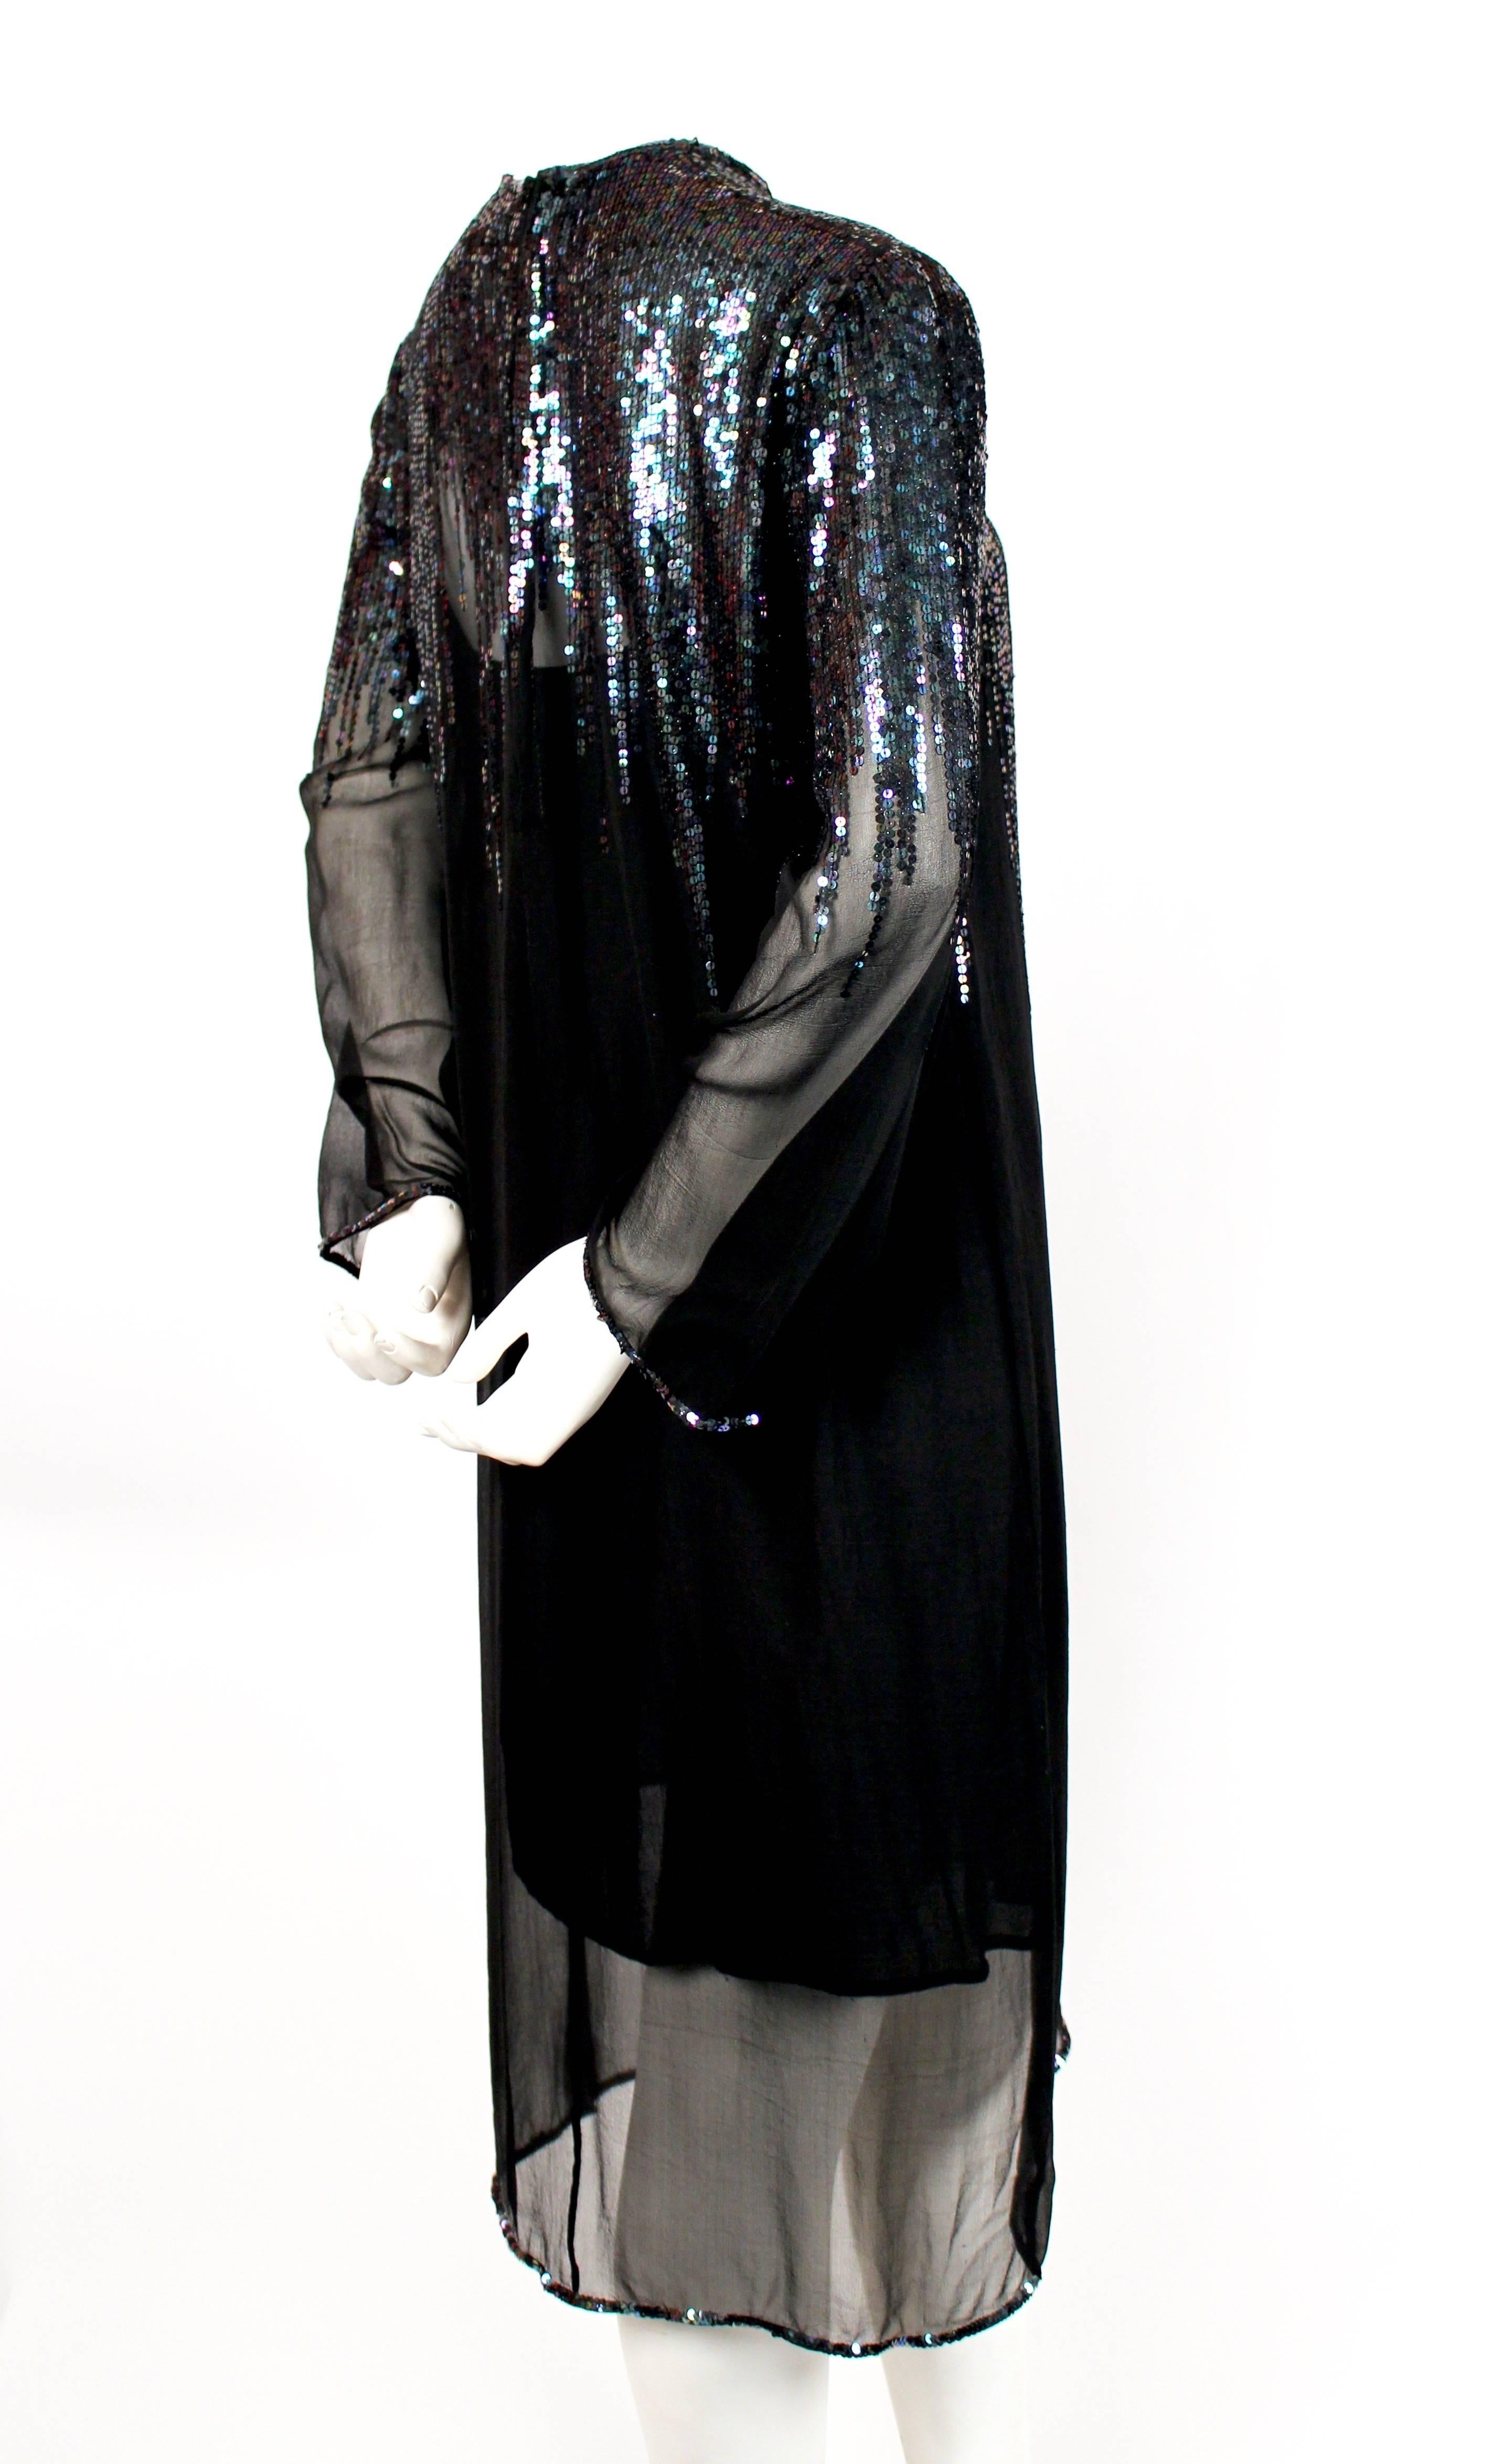 
Jet black sheer silk dress with sequins from Halston dating to the late 1970's. Dress slips over the head and secures with a hook/eye closures at back of neck. No size is indicated however this dress best fits a US 2-6. Approximate measurements: